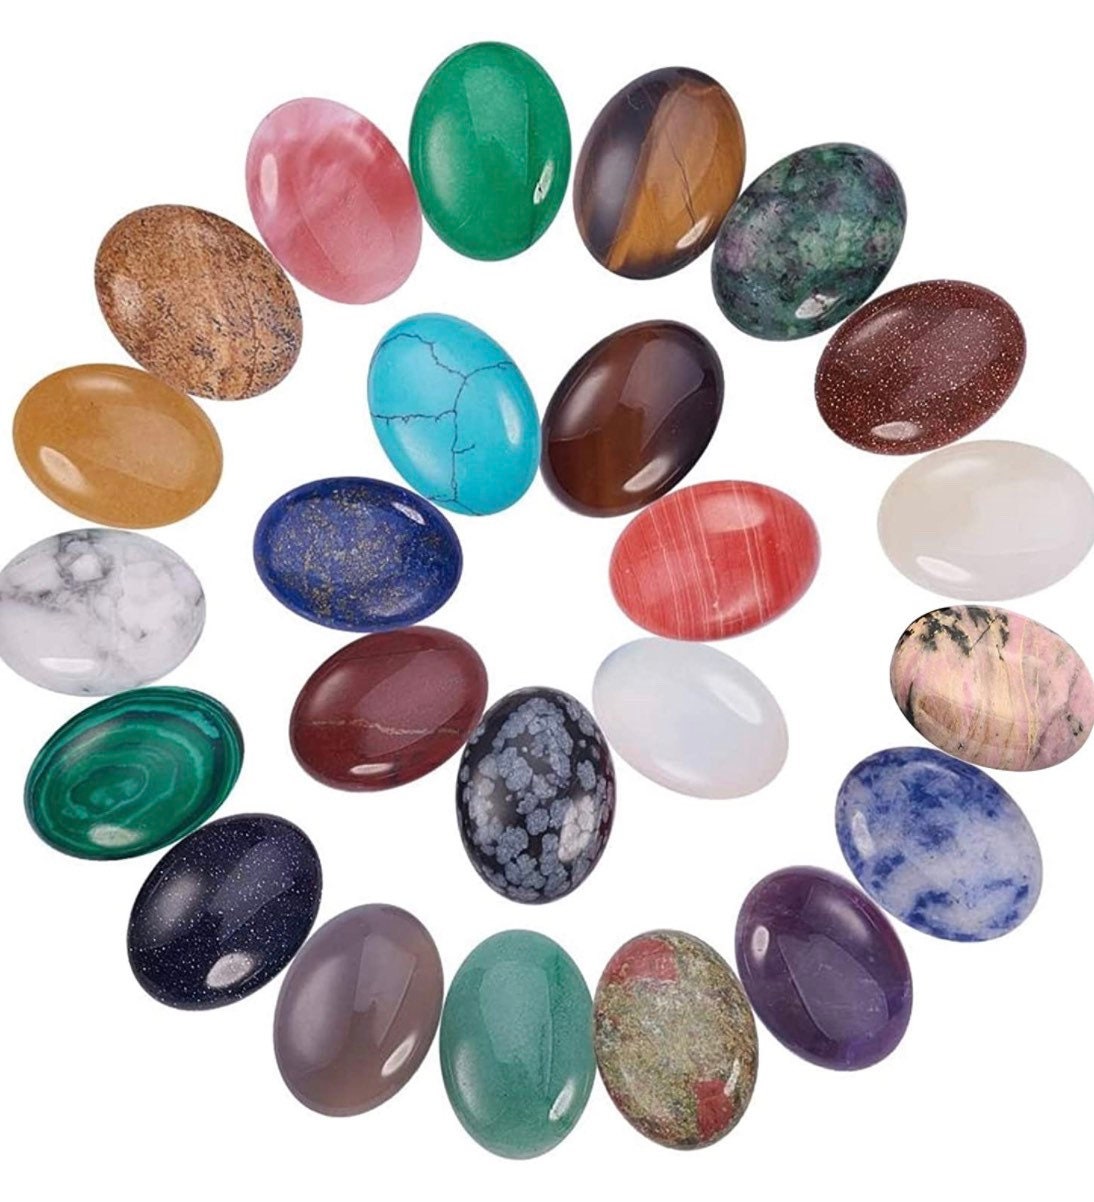 5pc 1” Stone Cabochon - Flat back Cabochon for jewelry and leather